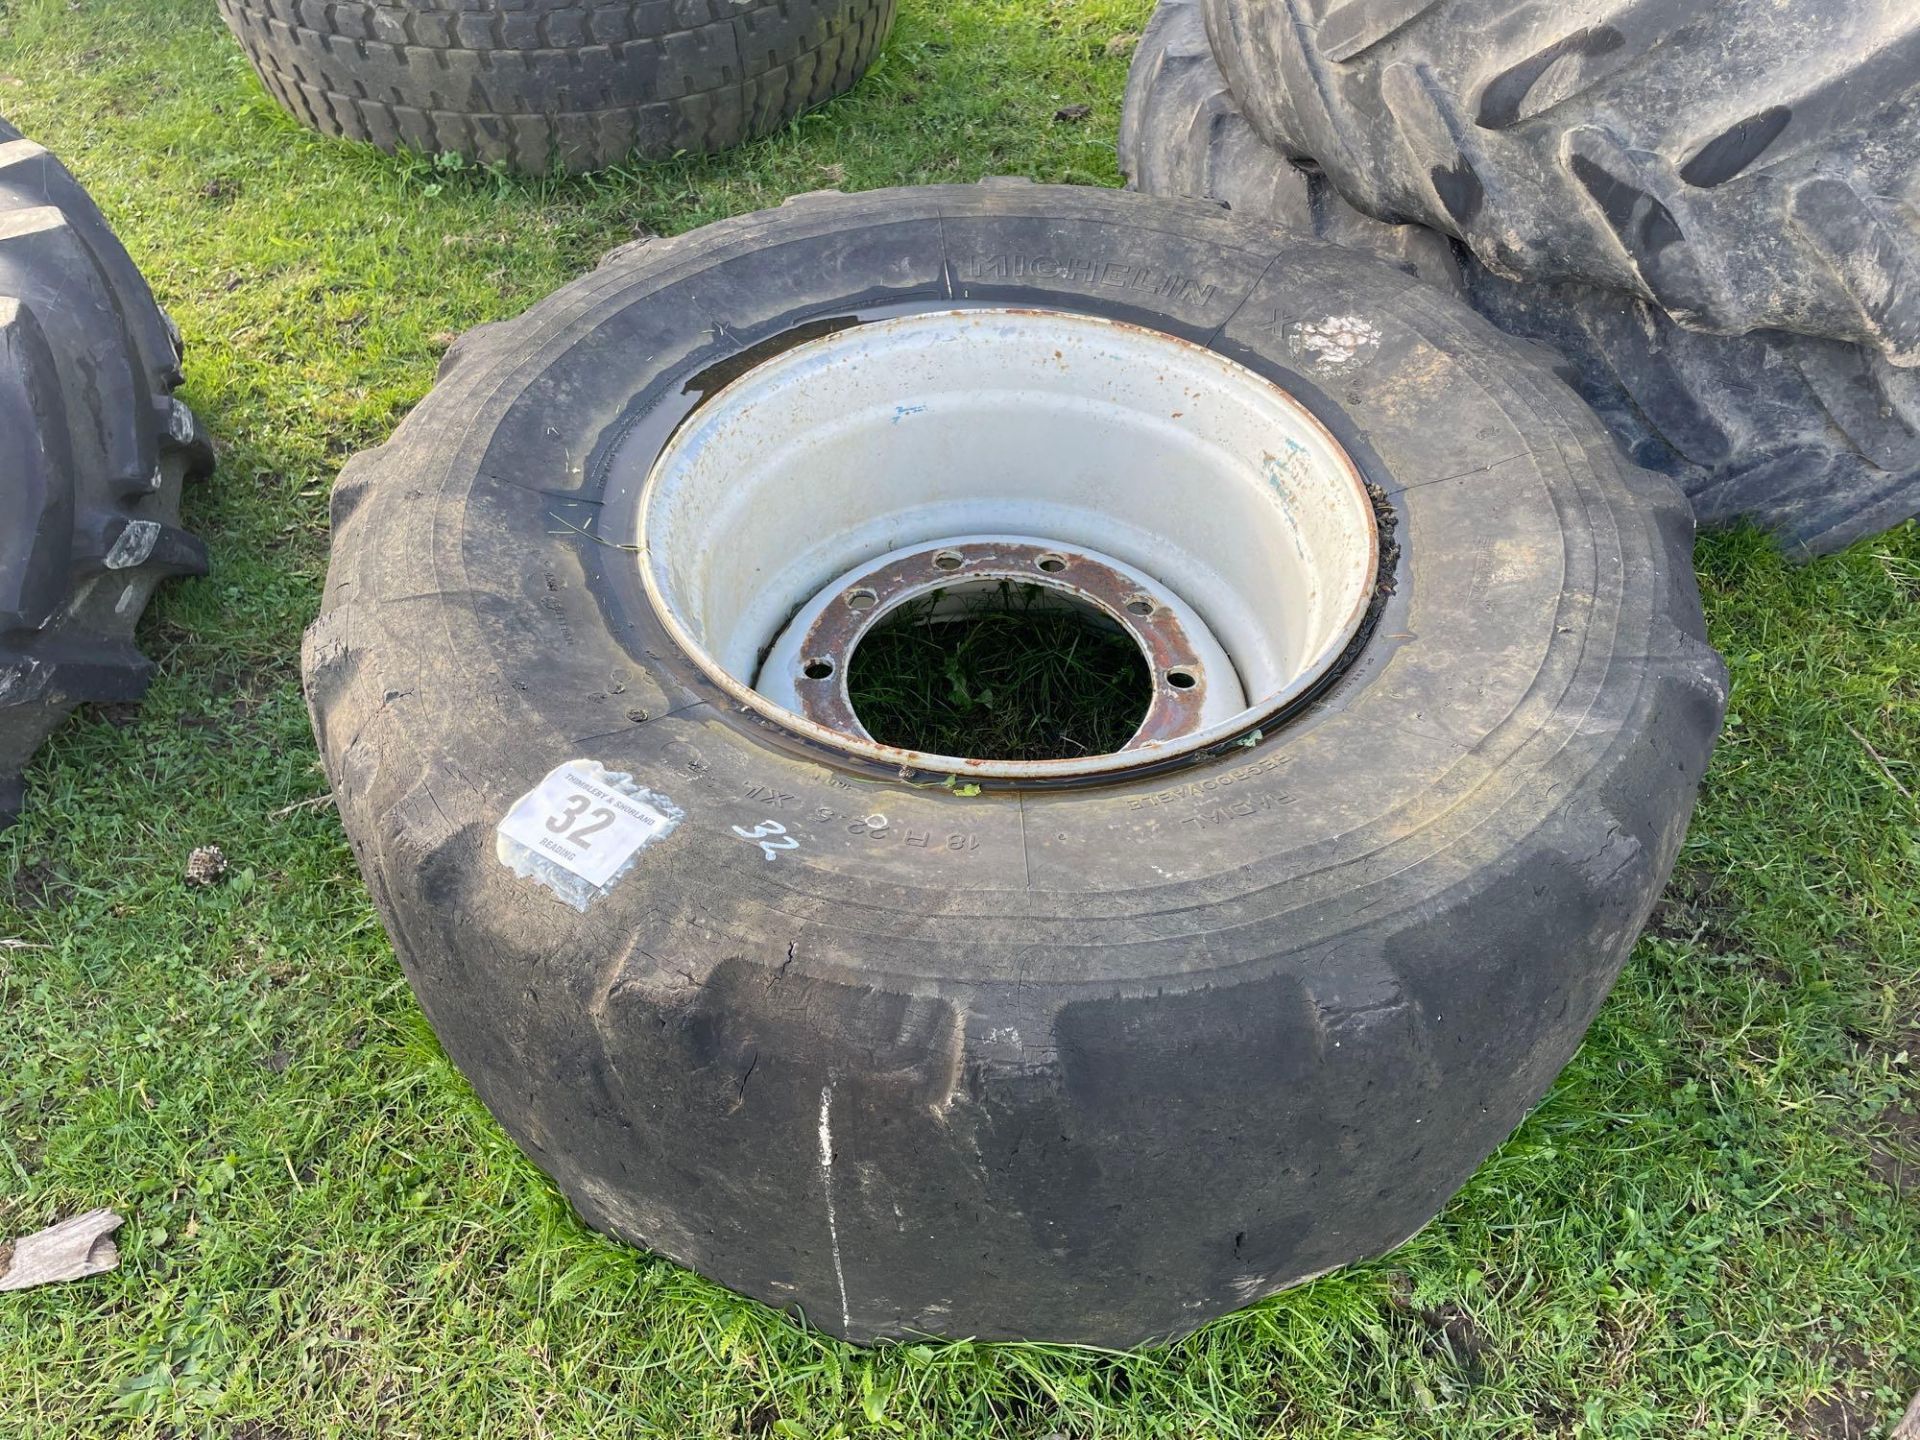 18R22.5 10 stud wheel and tyre